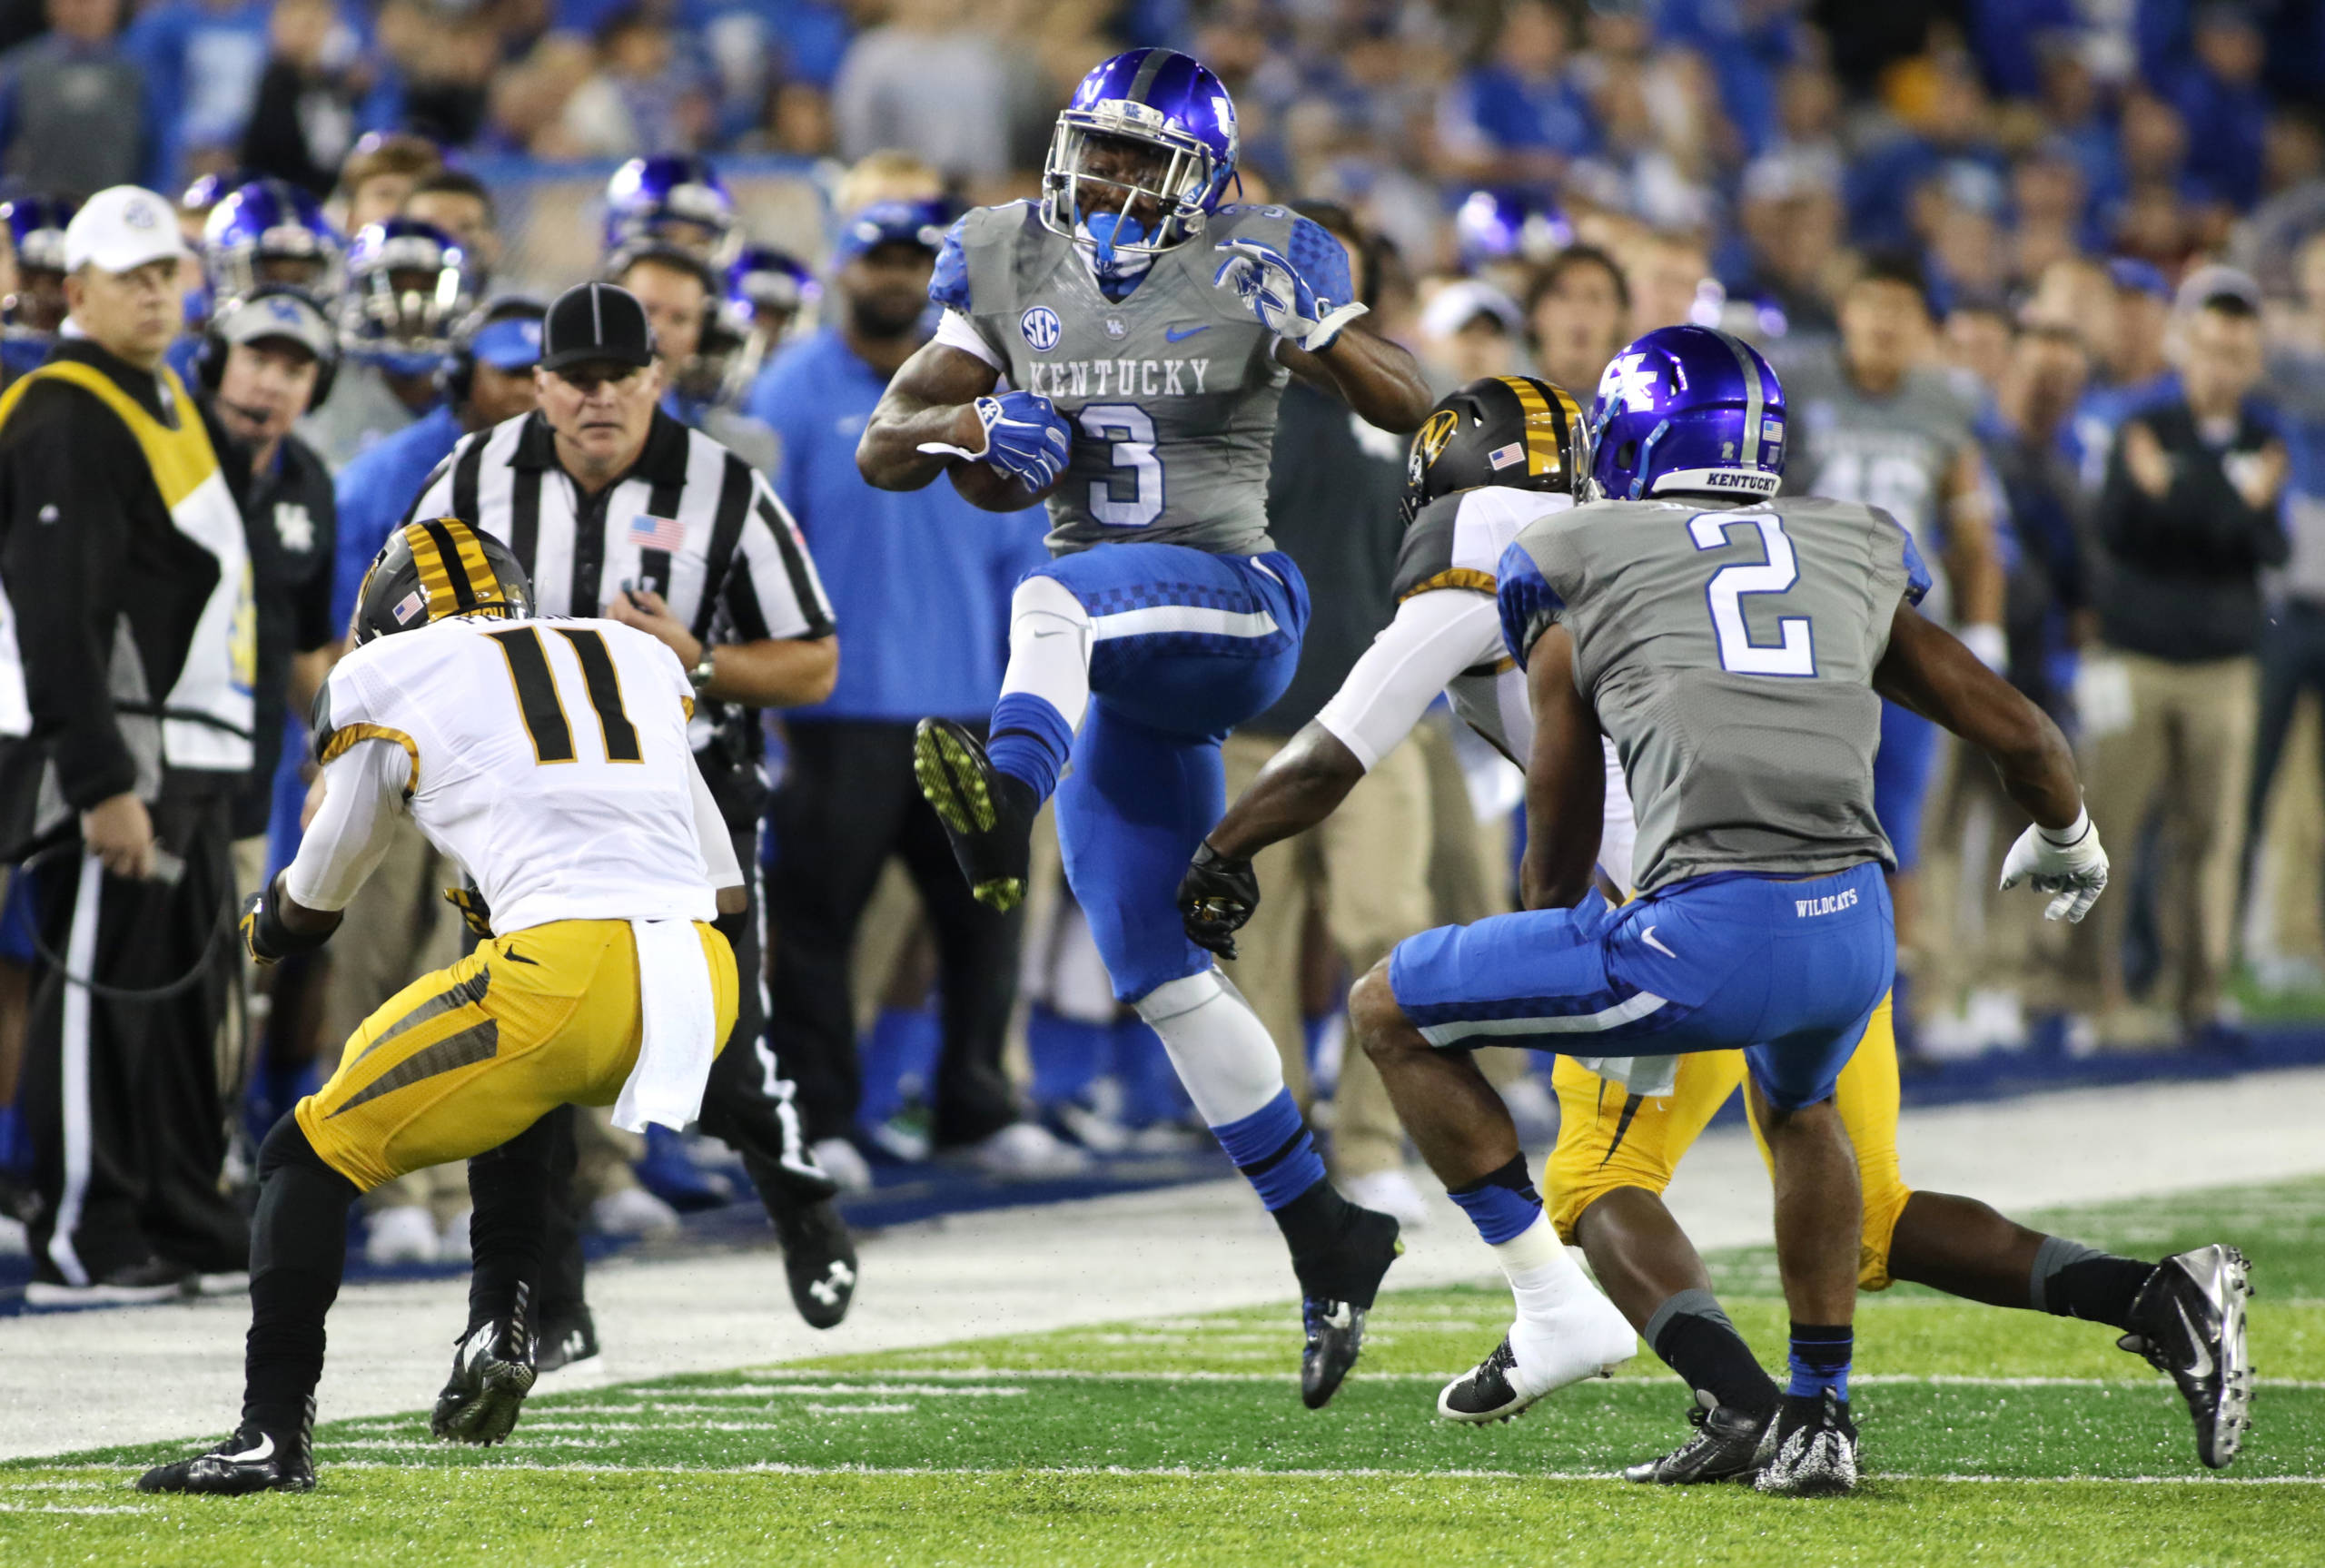 Notes from UK's Win over Missouri